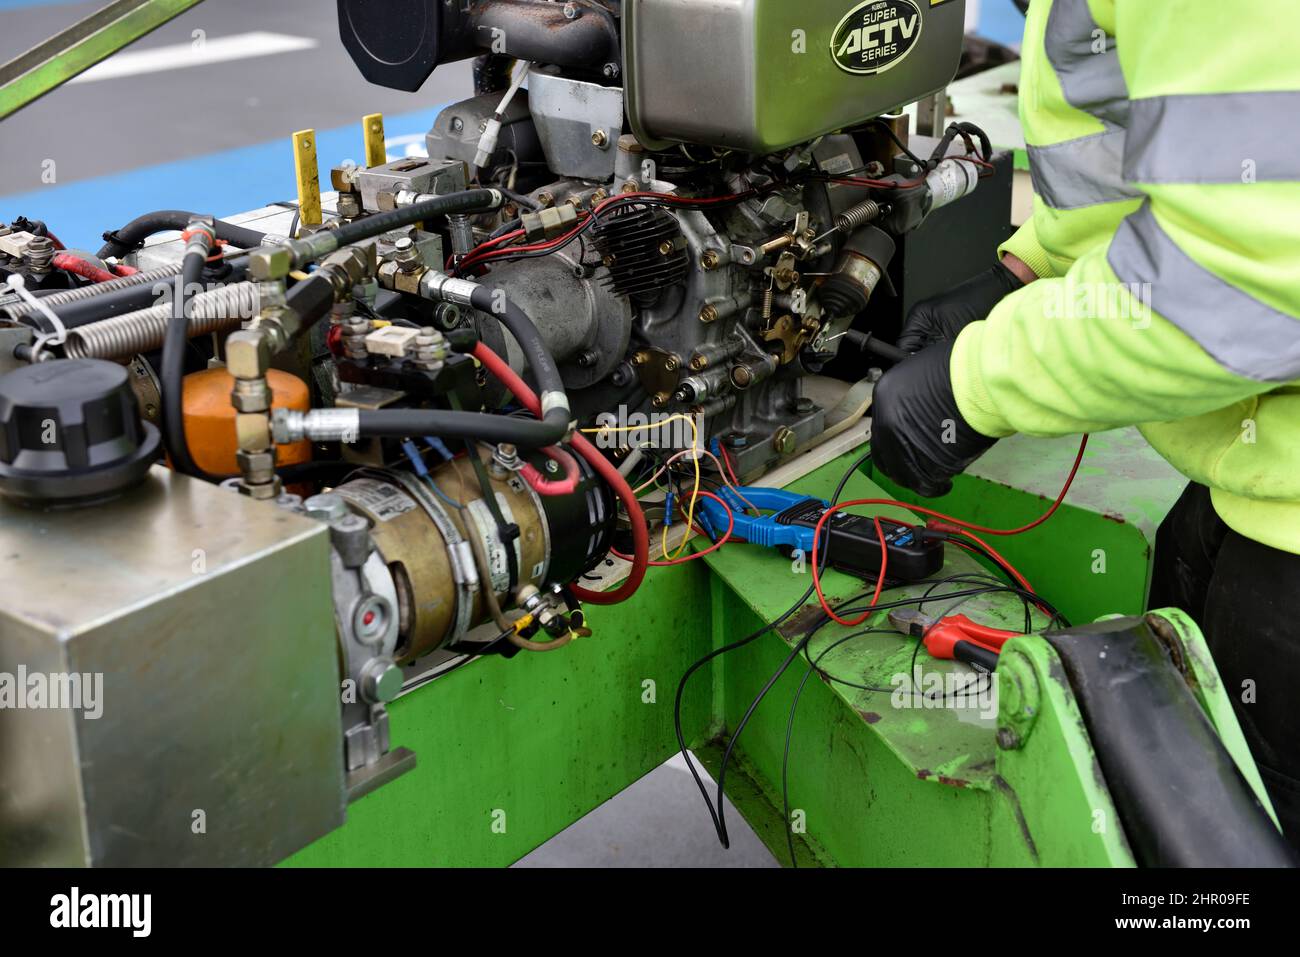 Mechanic working on electrics of engine and hydraulics of a cherry picker lift machine Stock Photo